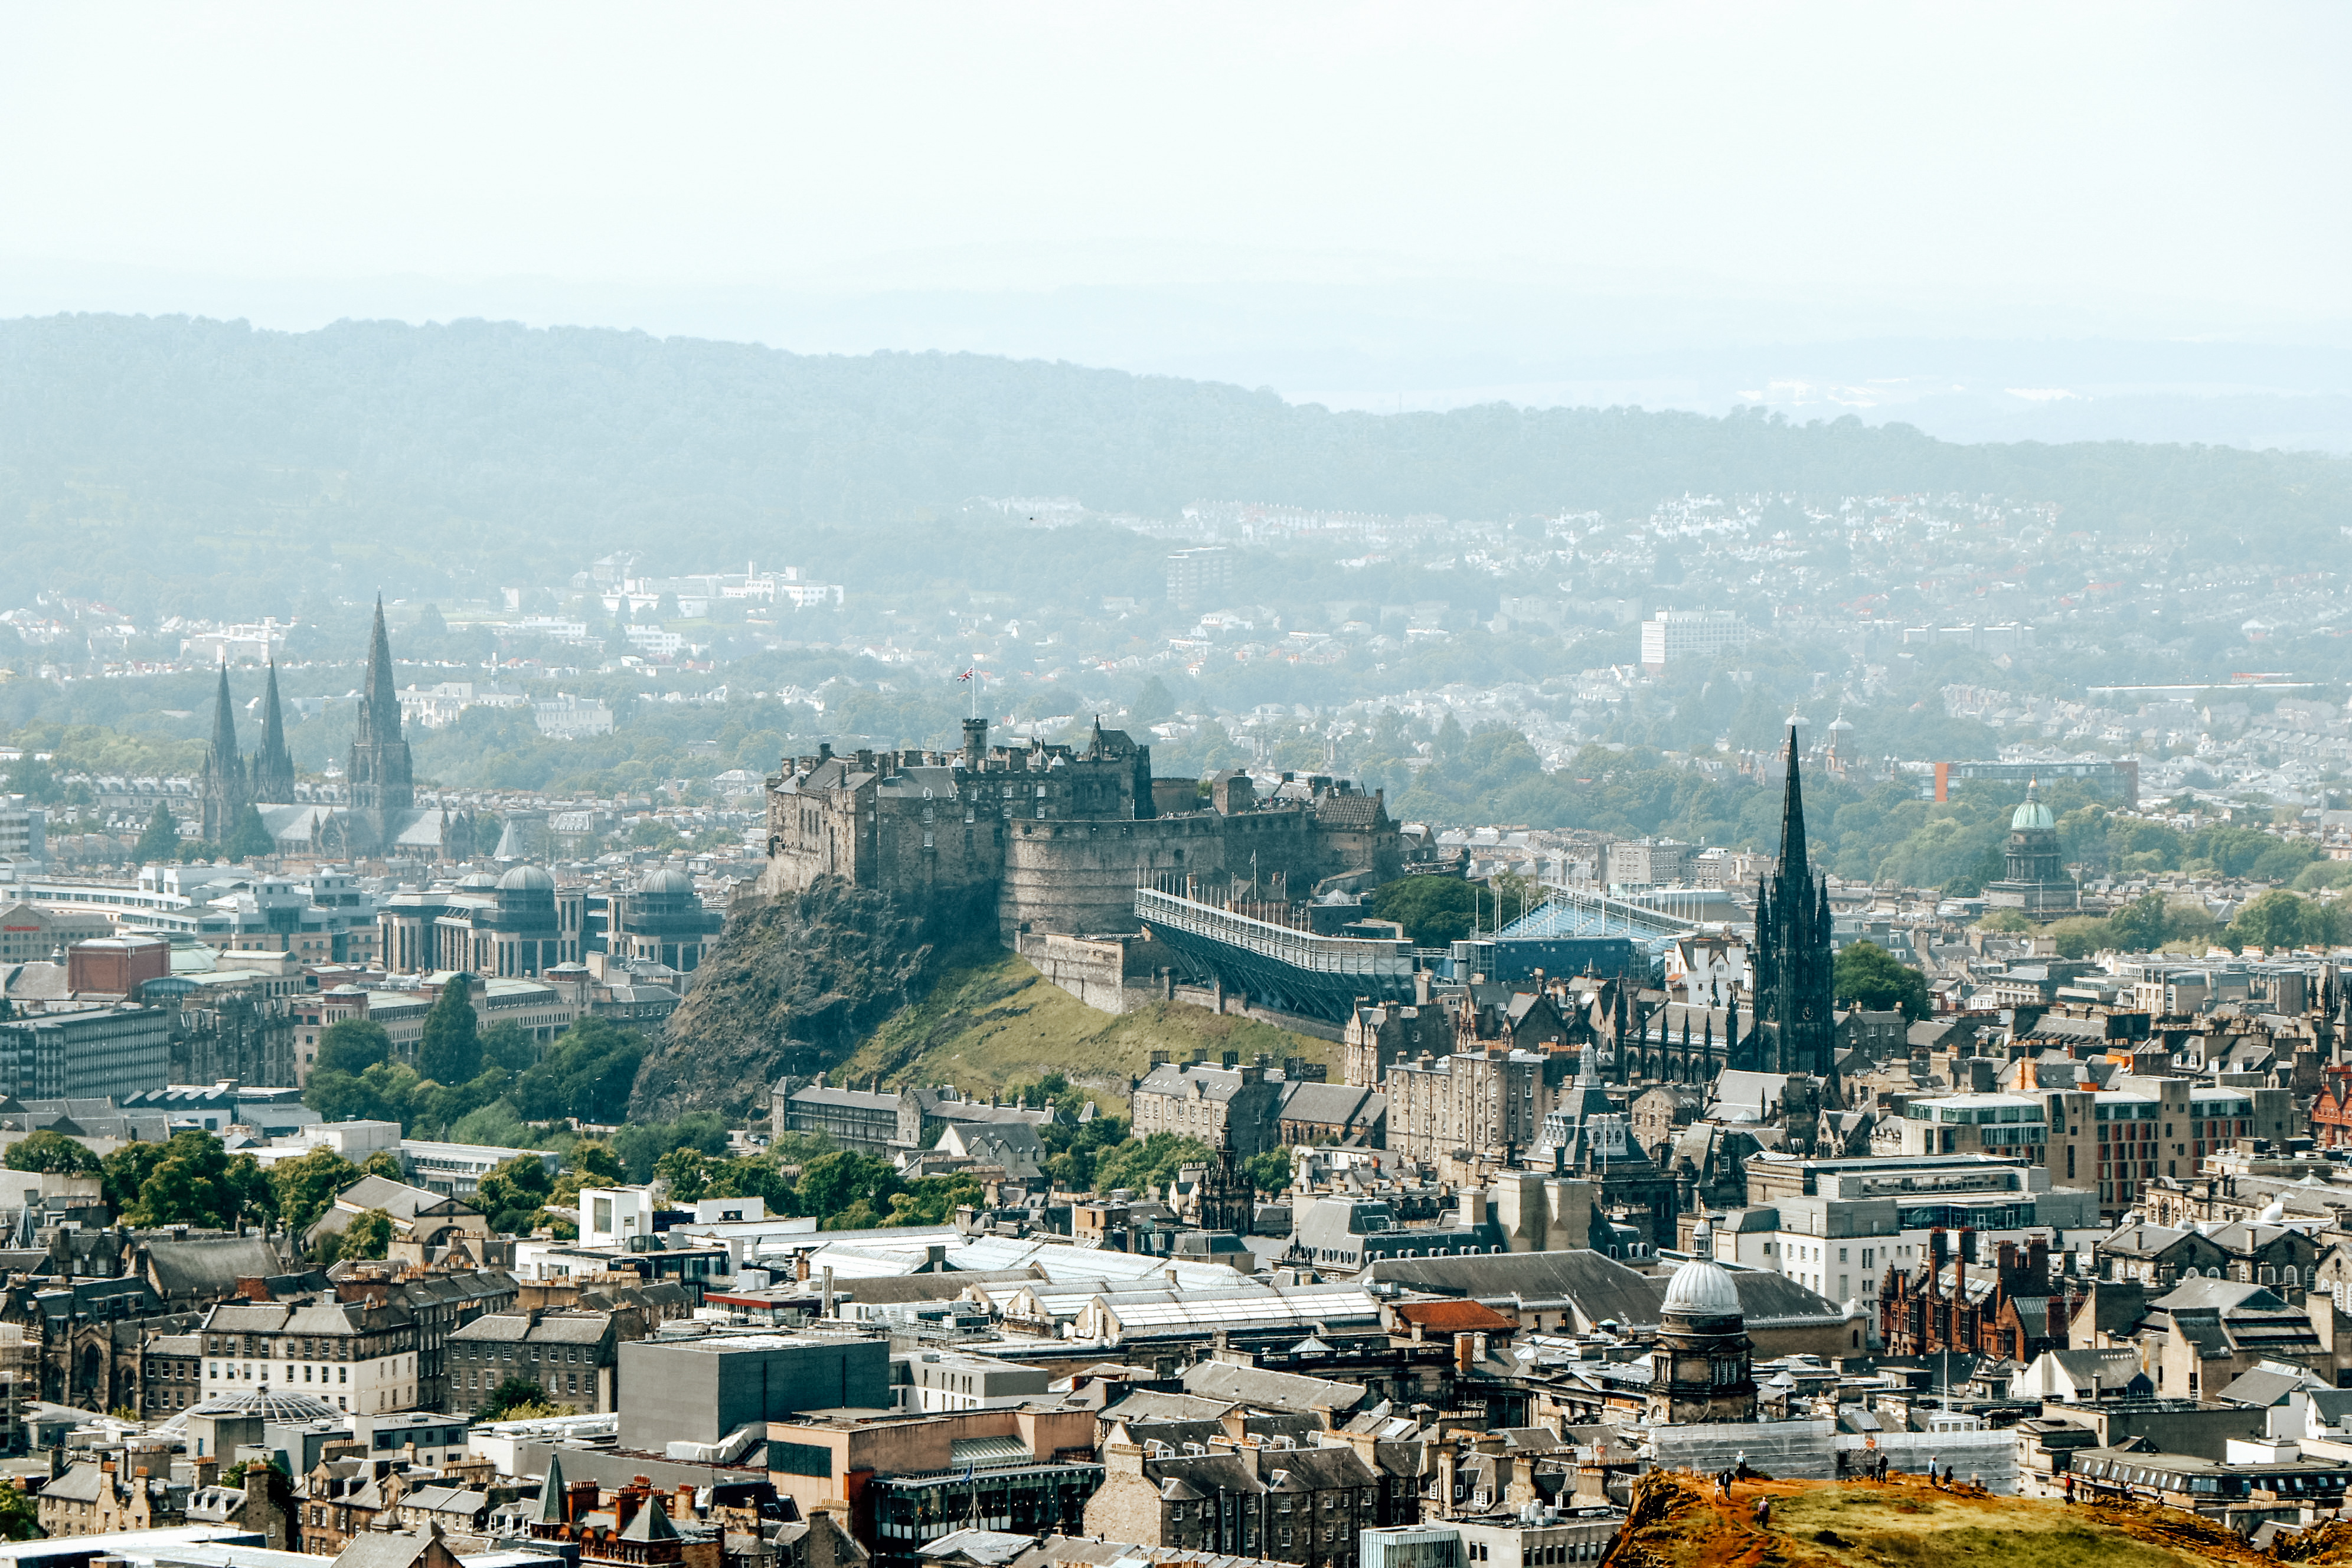 View of Edinburgh Castle and the City from Salisbury Crags